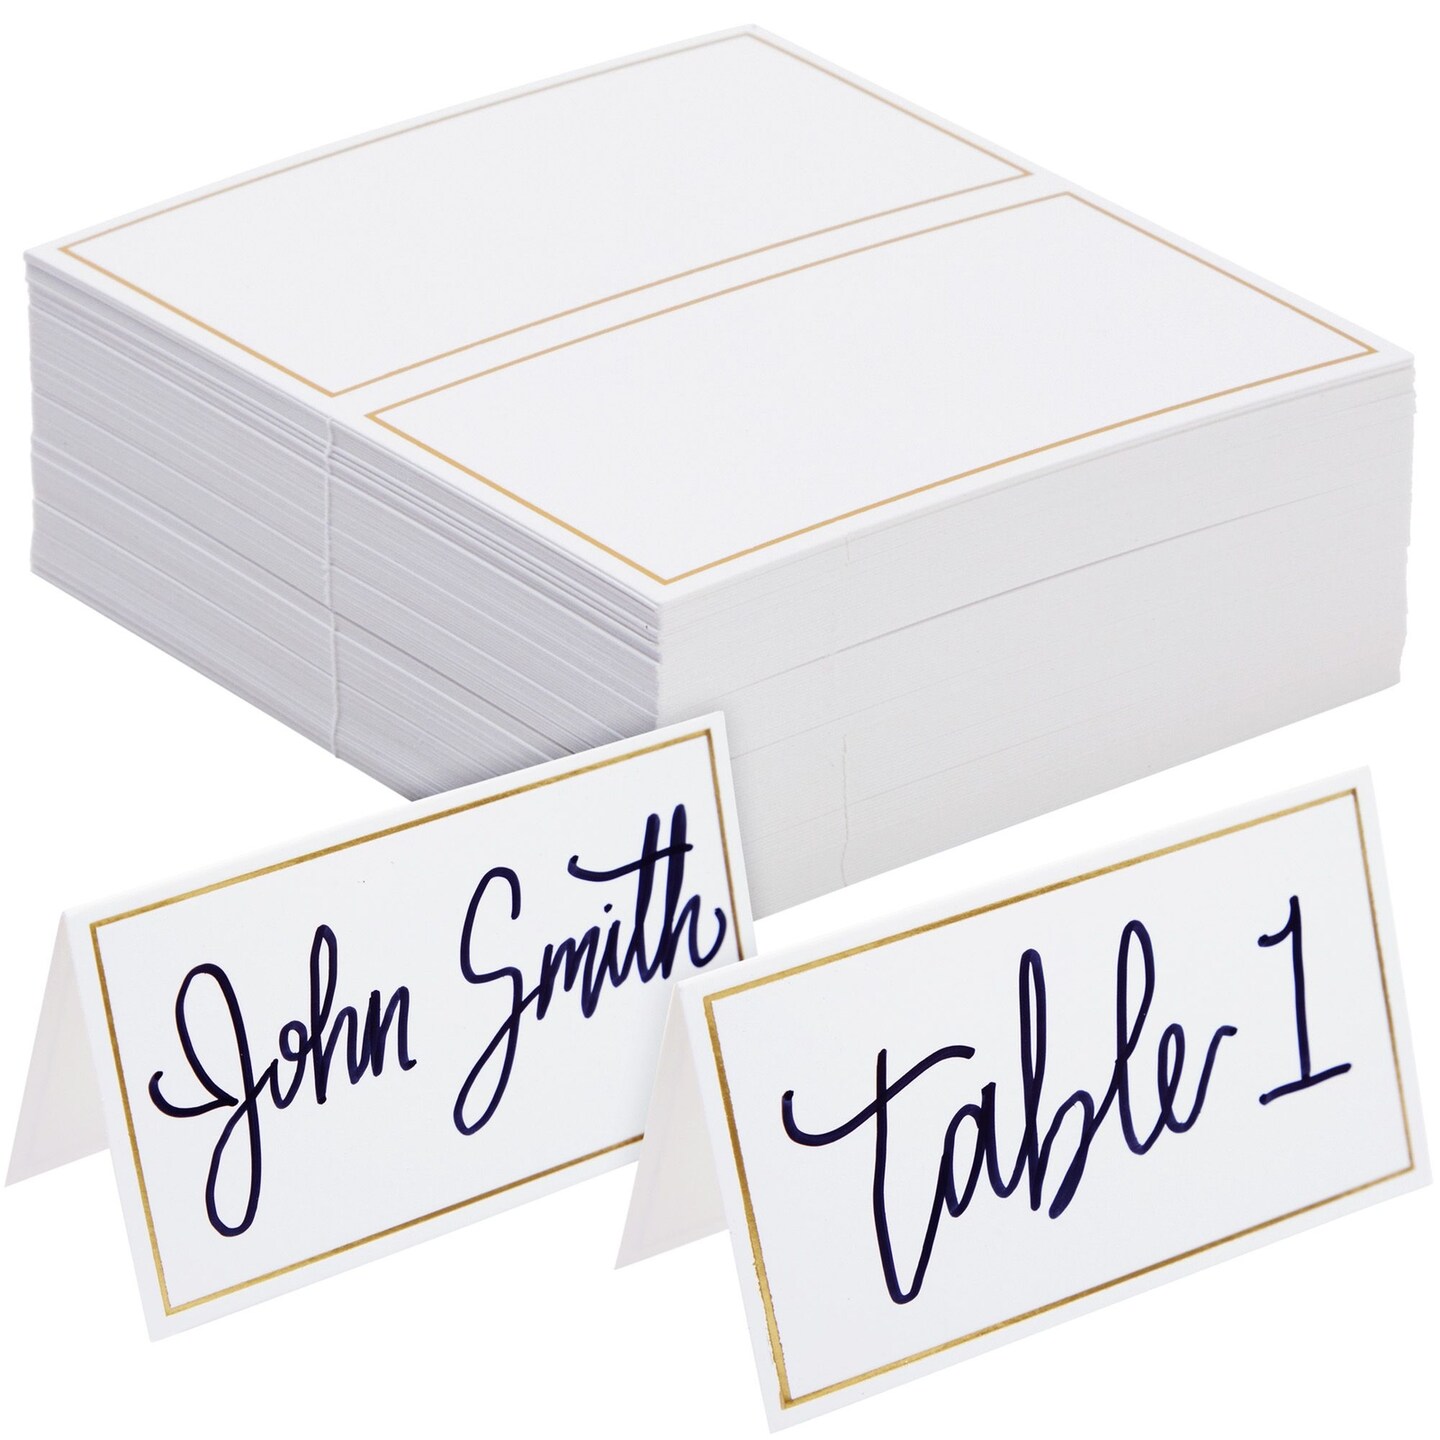 12 Packs: 48 ct. (576 total) Gold Border Place Cards by Recollections™ 